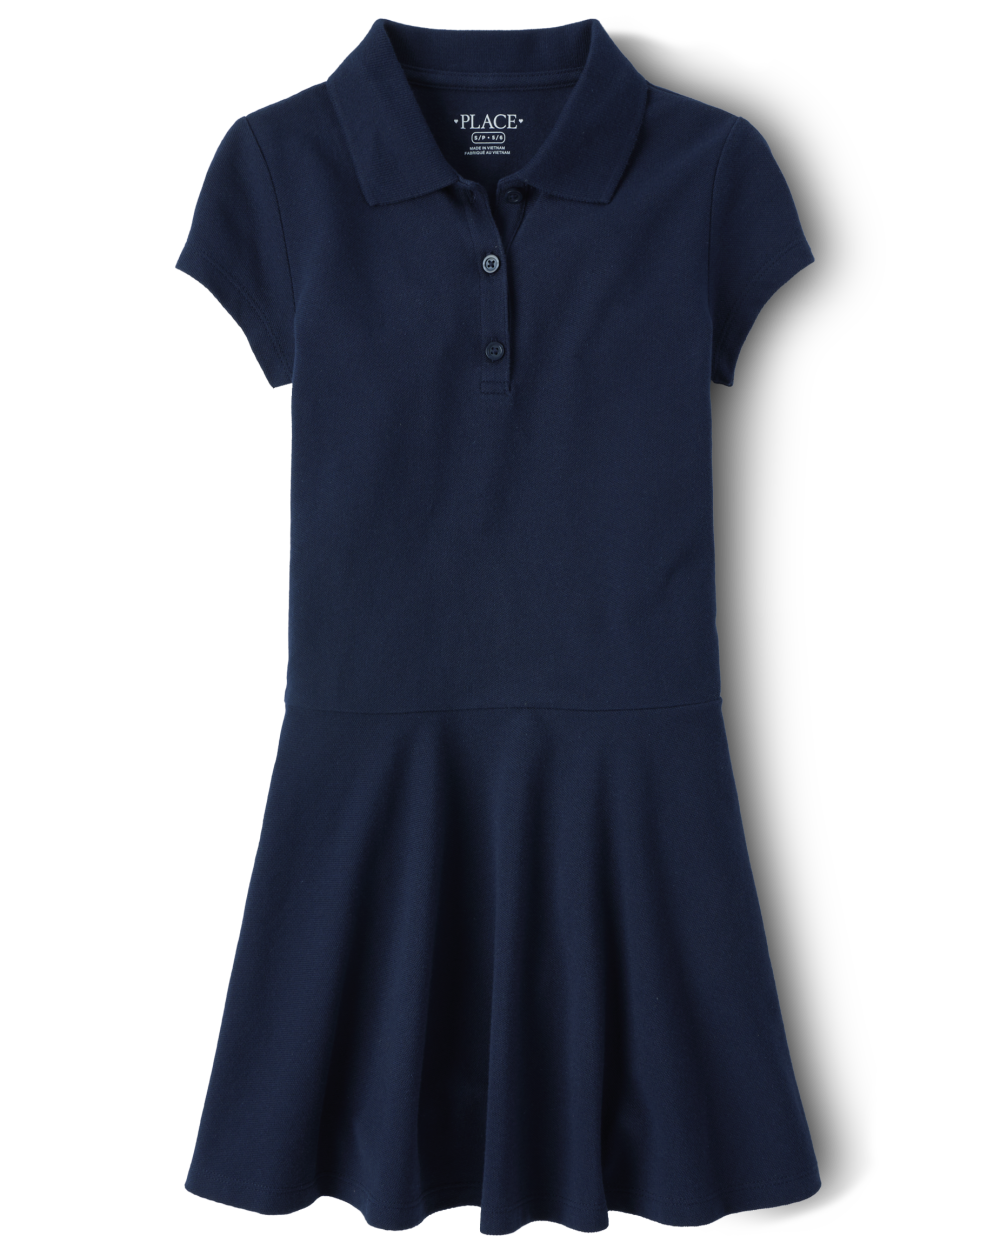 Girls Above the Knee Collared Button Front Short Sleeves Sleeves Dress